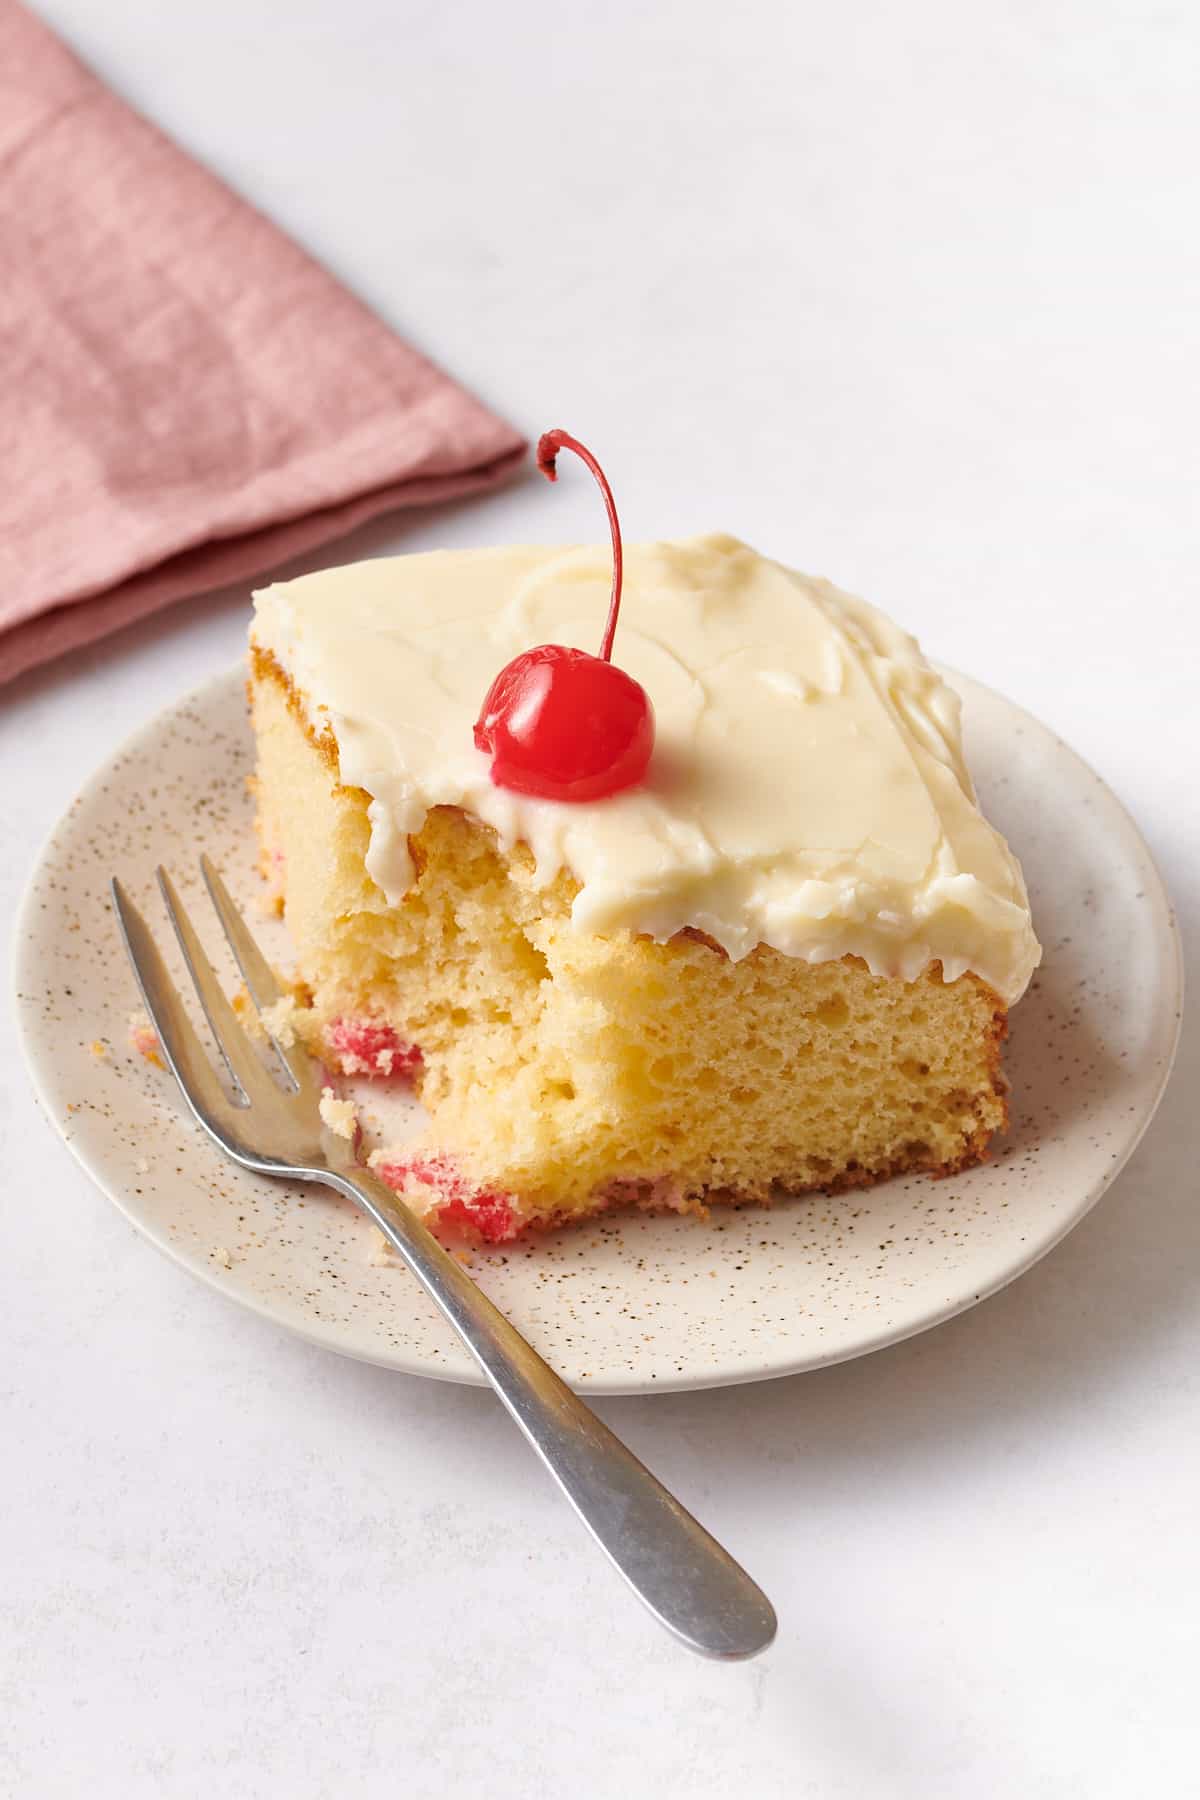 close up image of a square serving of cherry cake served on a speckled beige plate with a silver fork